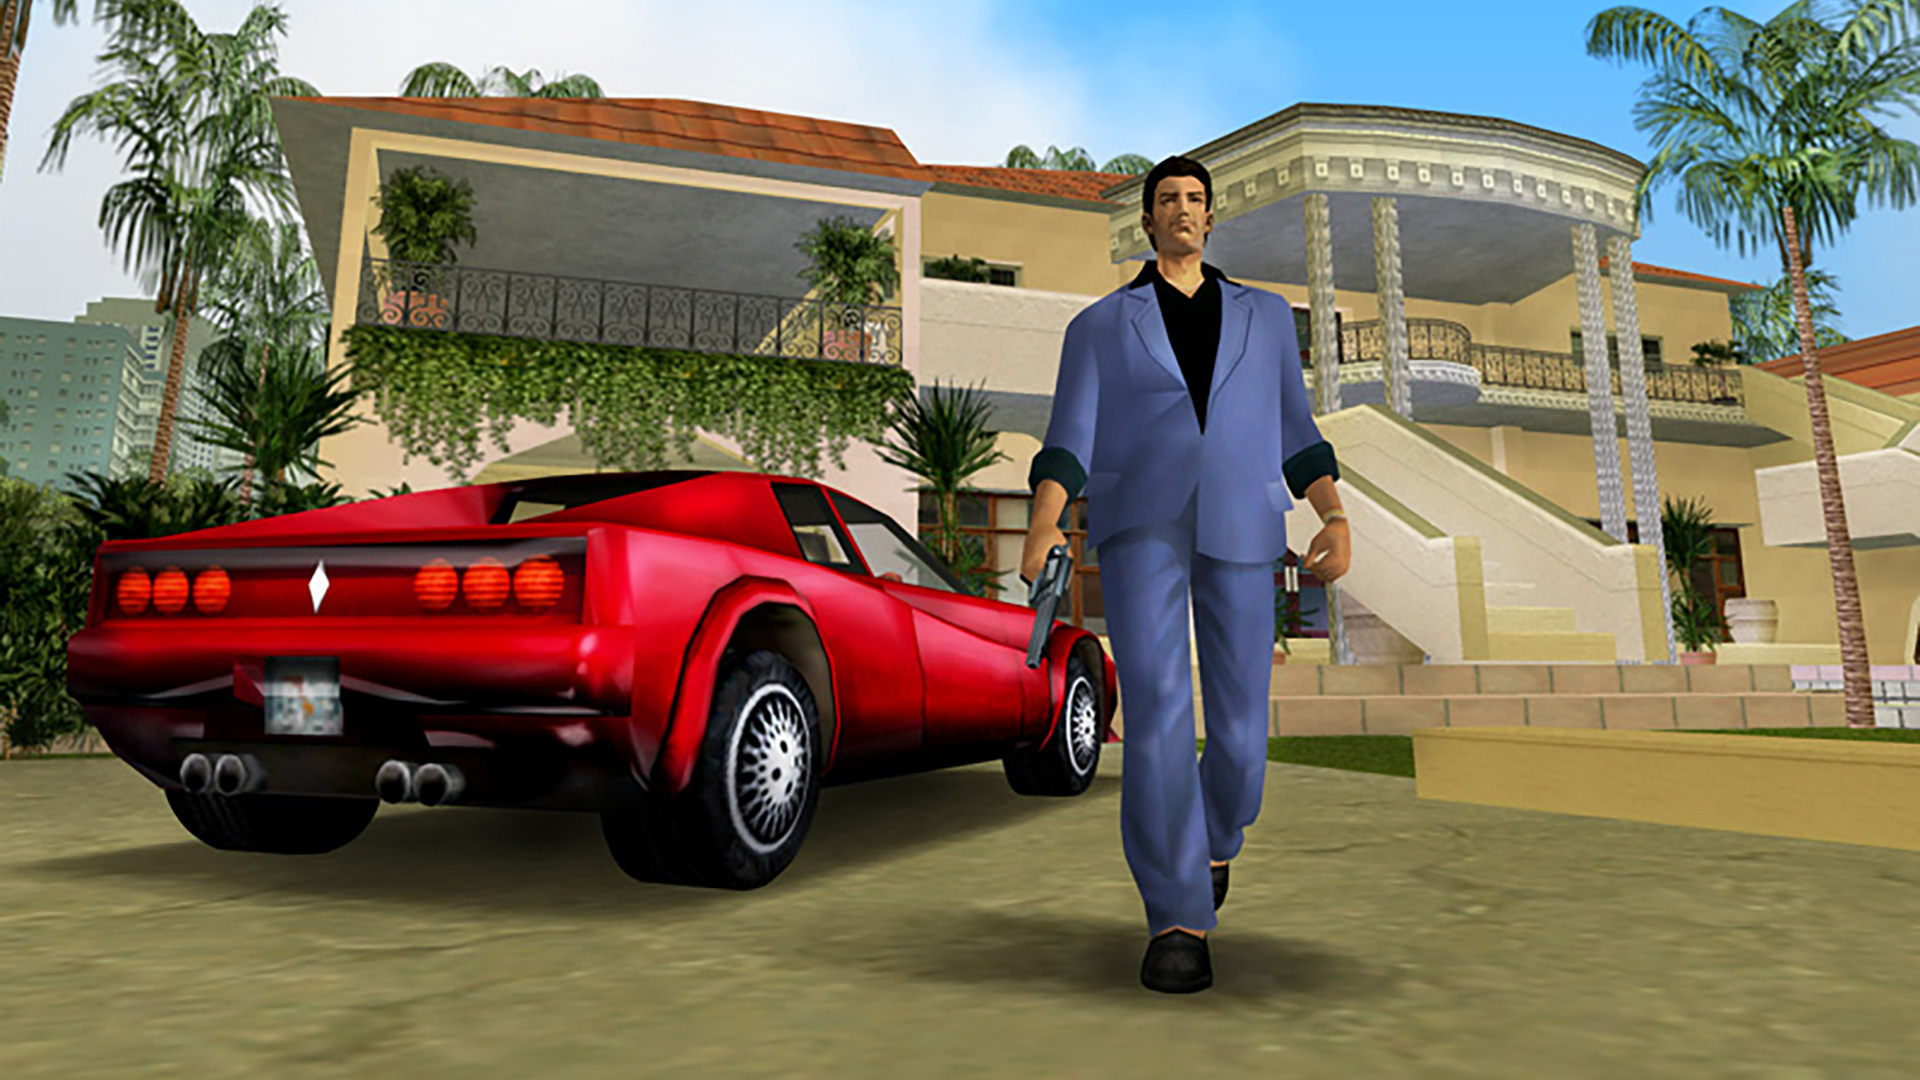 GTA 3' and 'Vice City' fan project has received a DMCA takedown